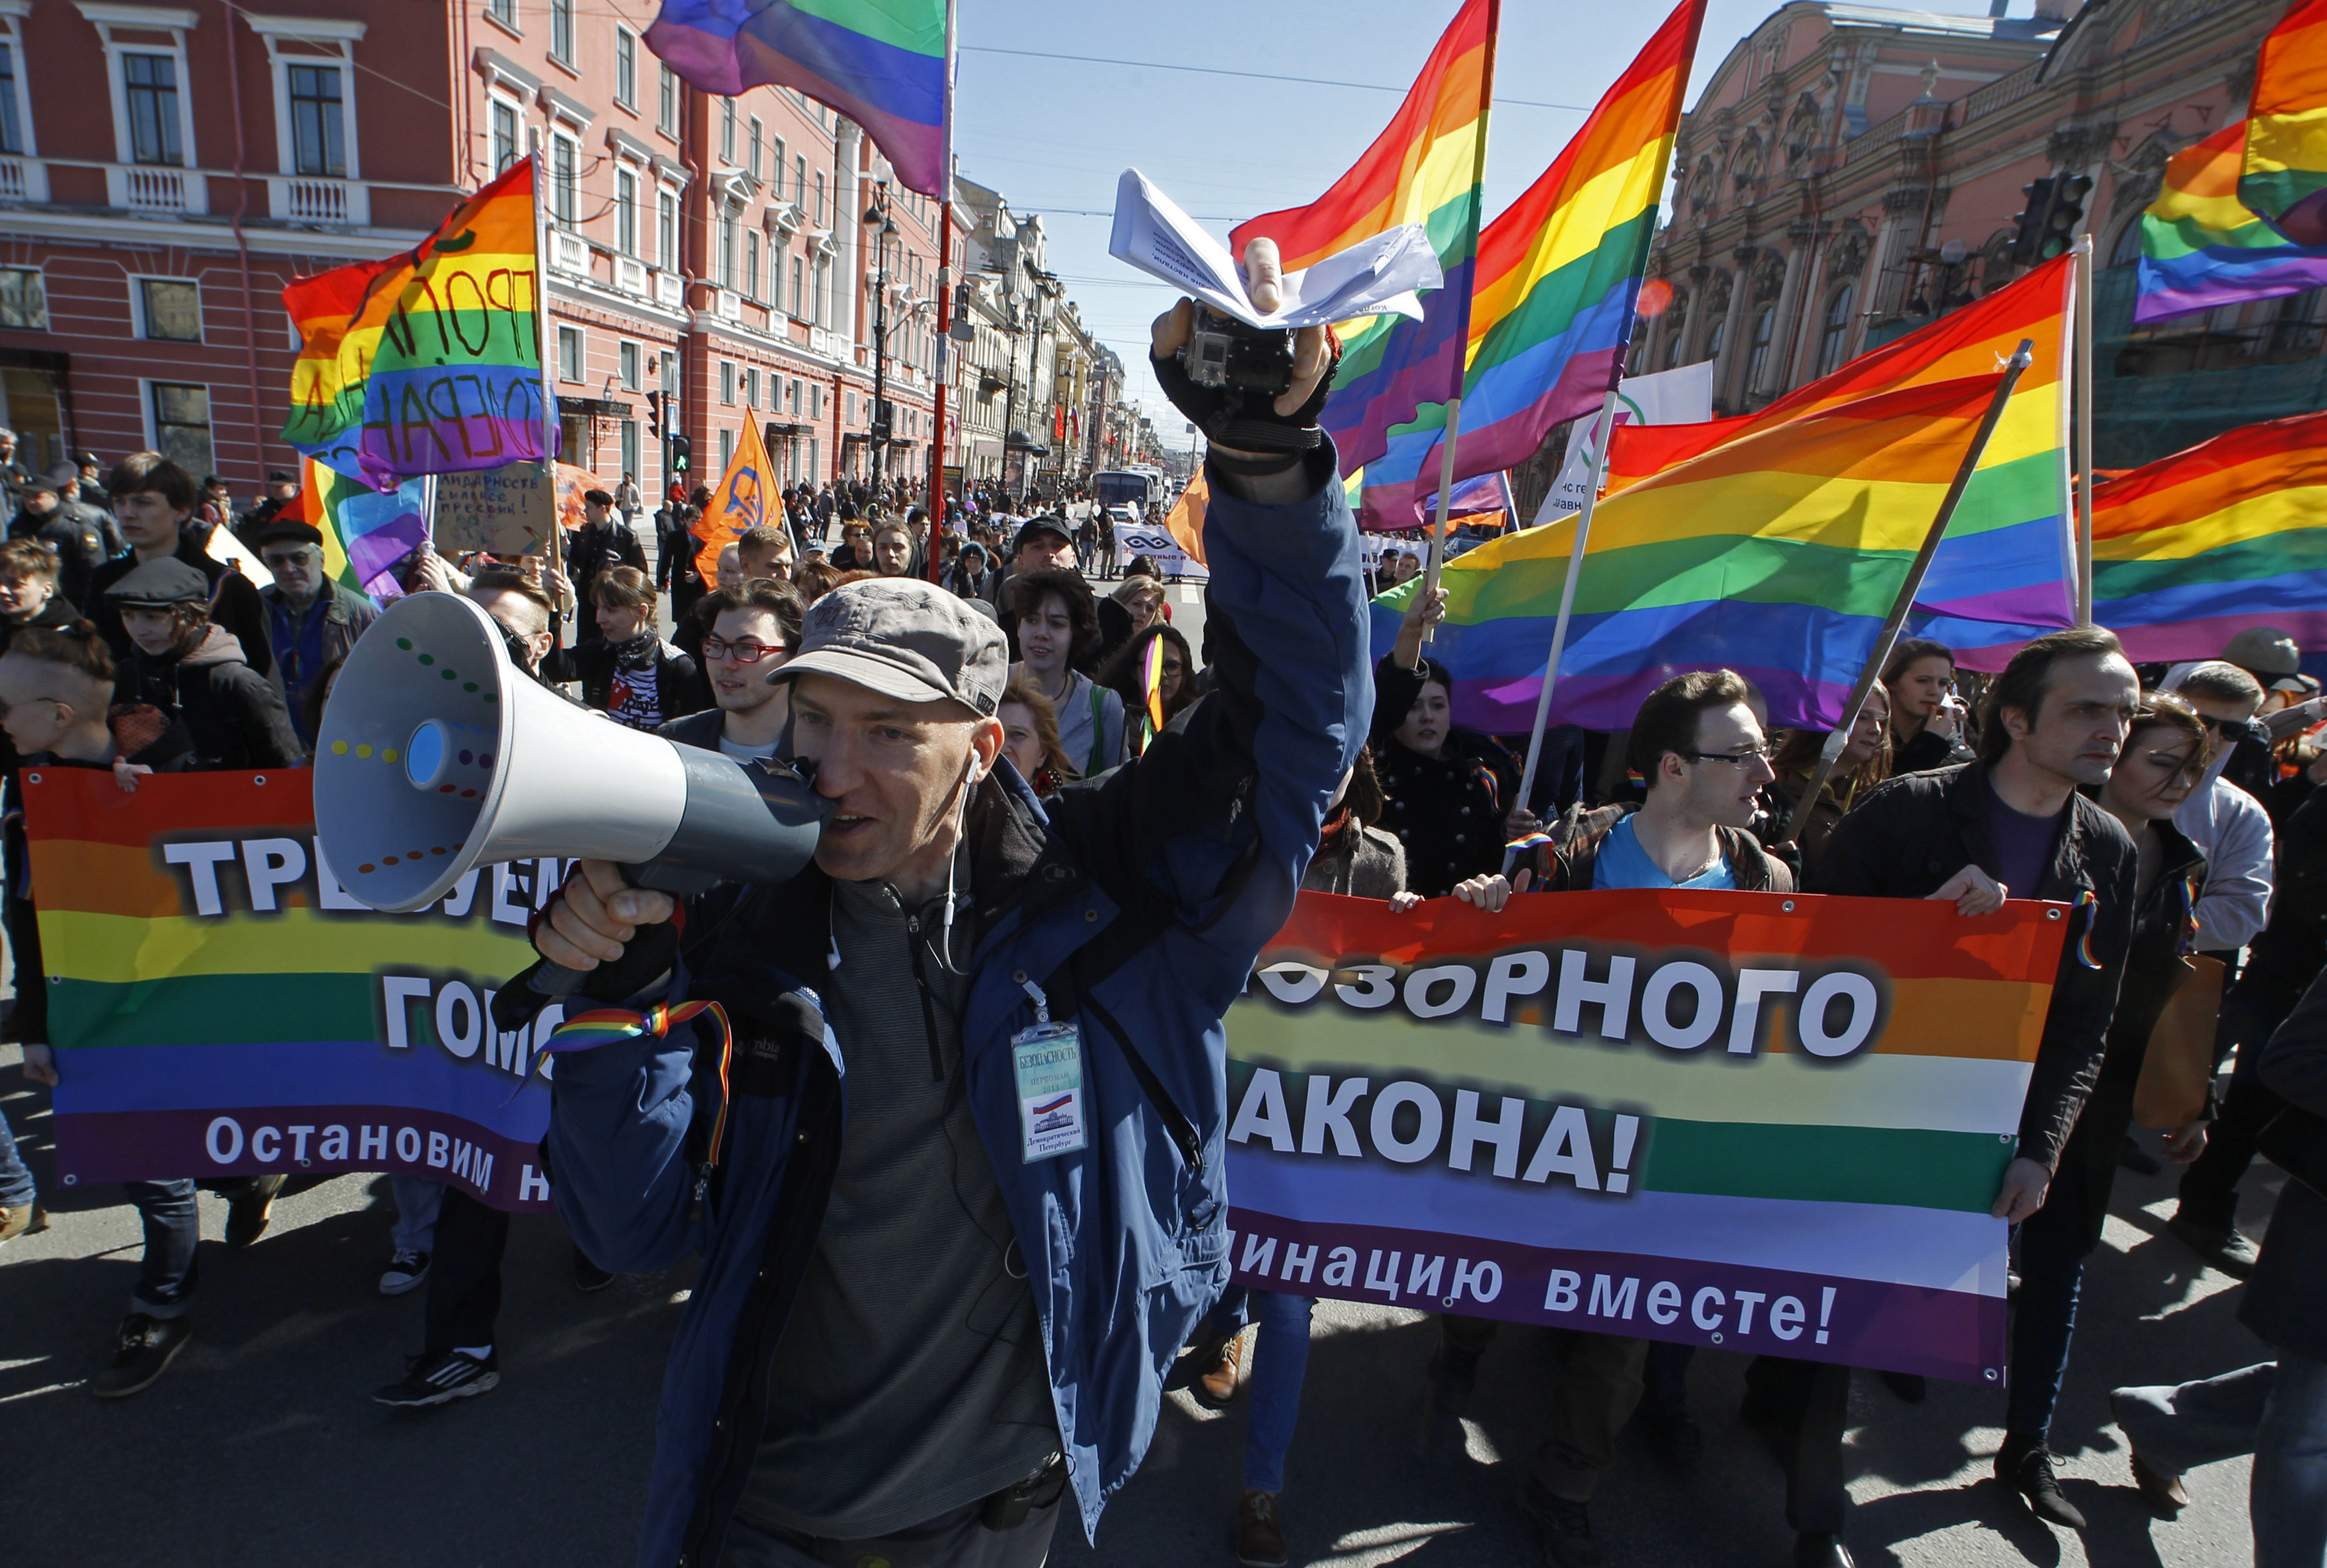 1 May 2013, Russia. Activists in St. Petersburg march in support of LGBT rights.